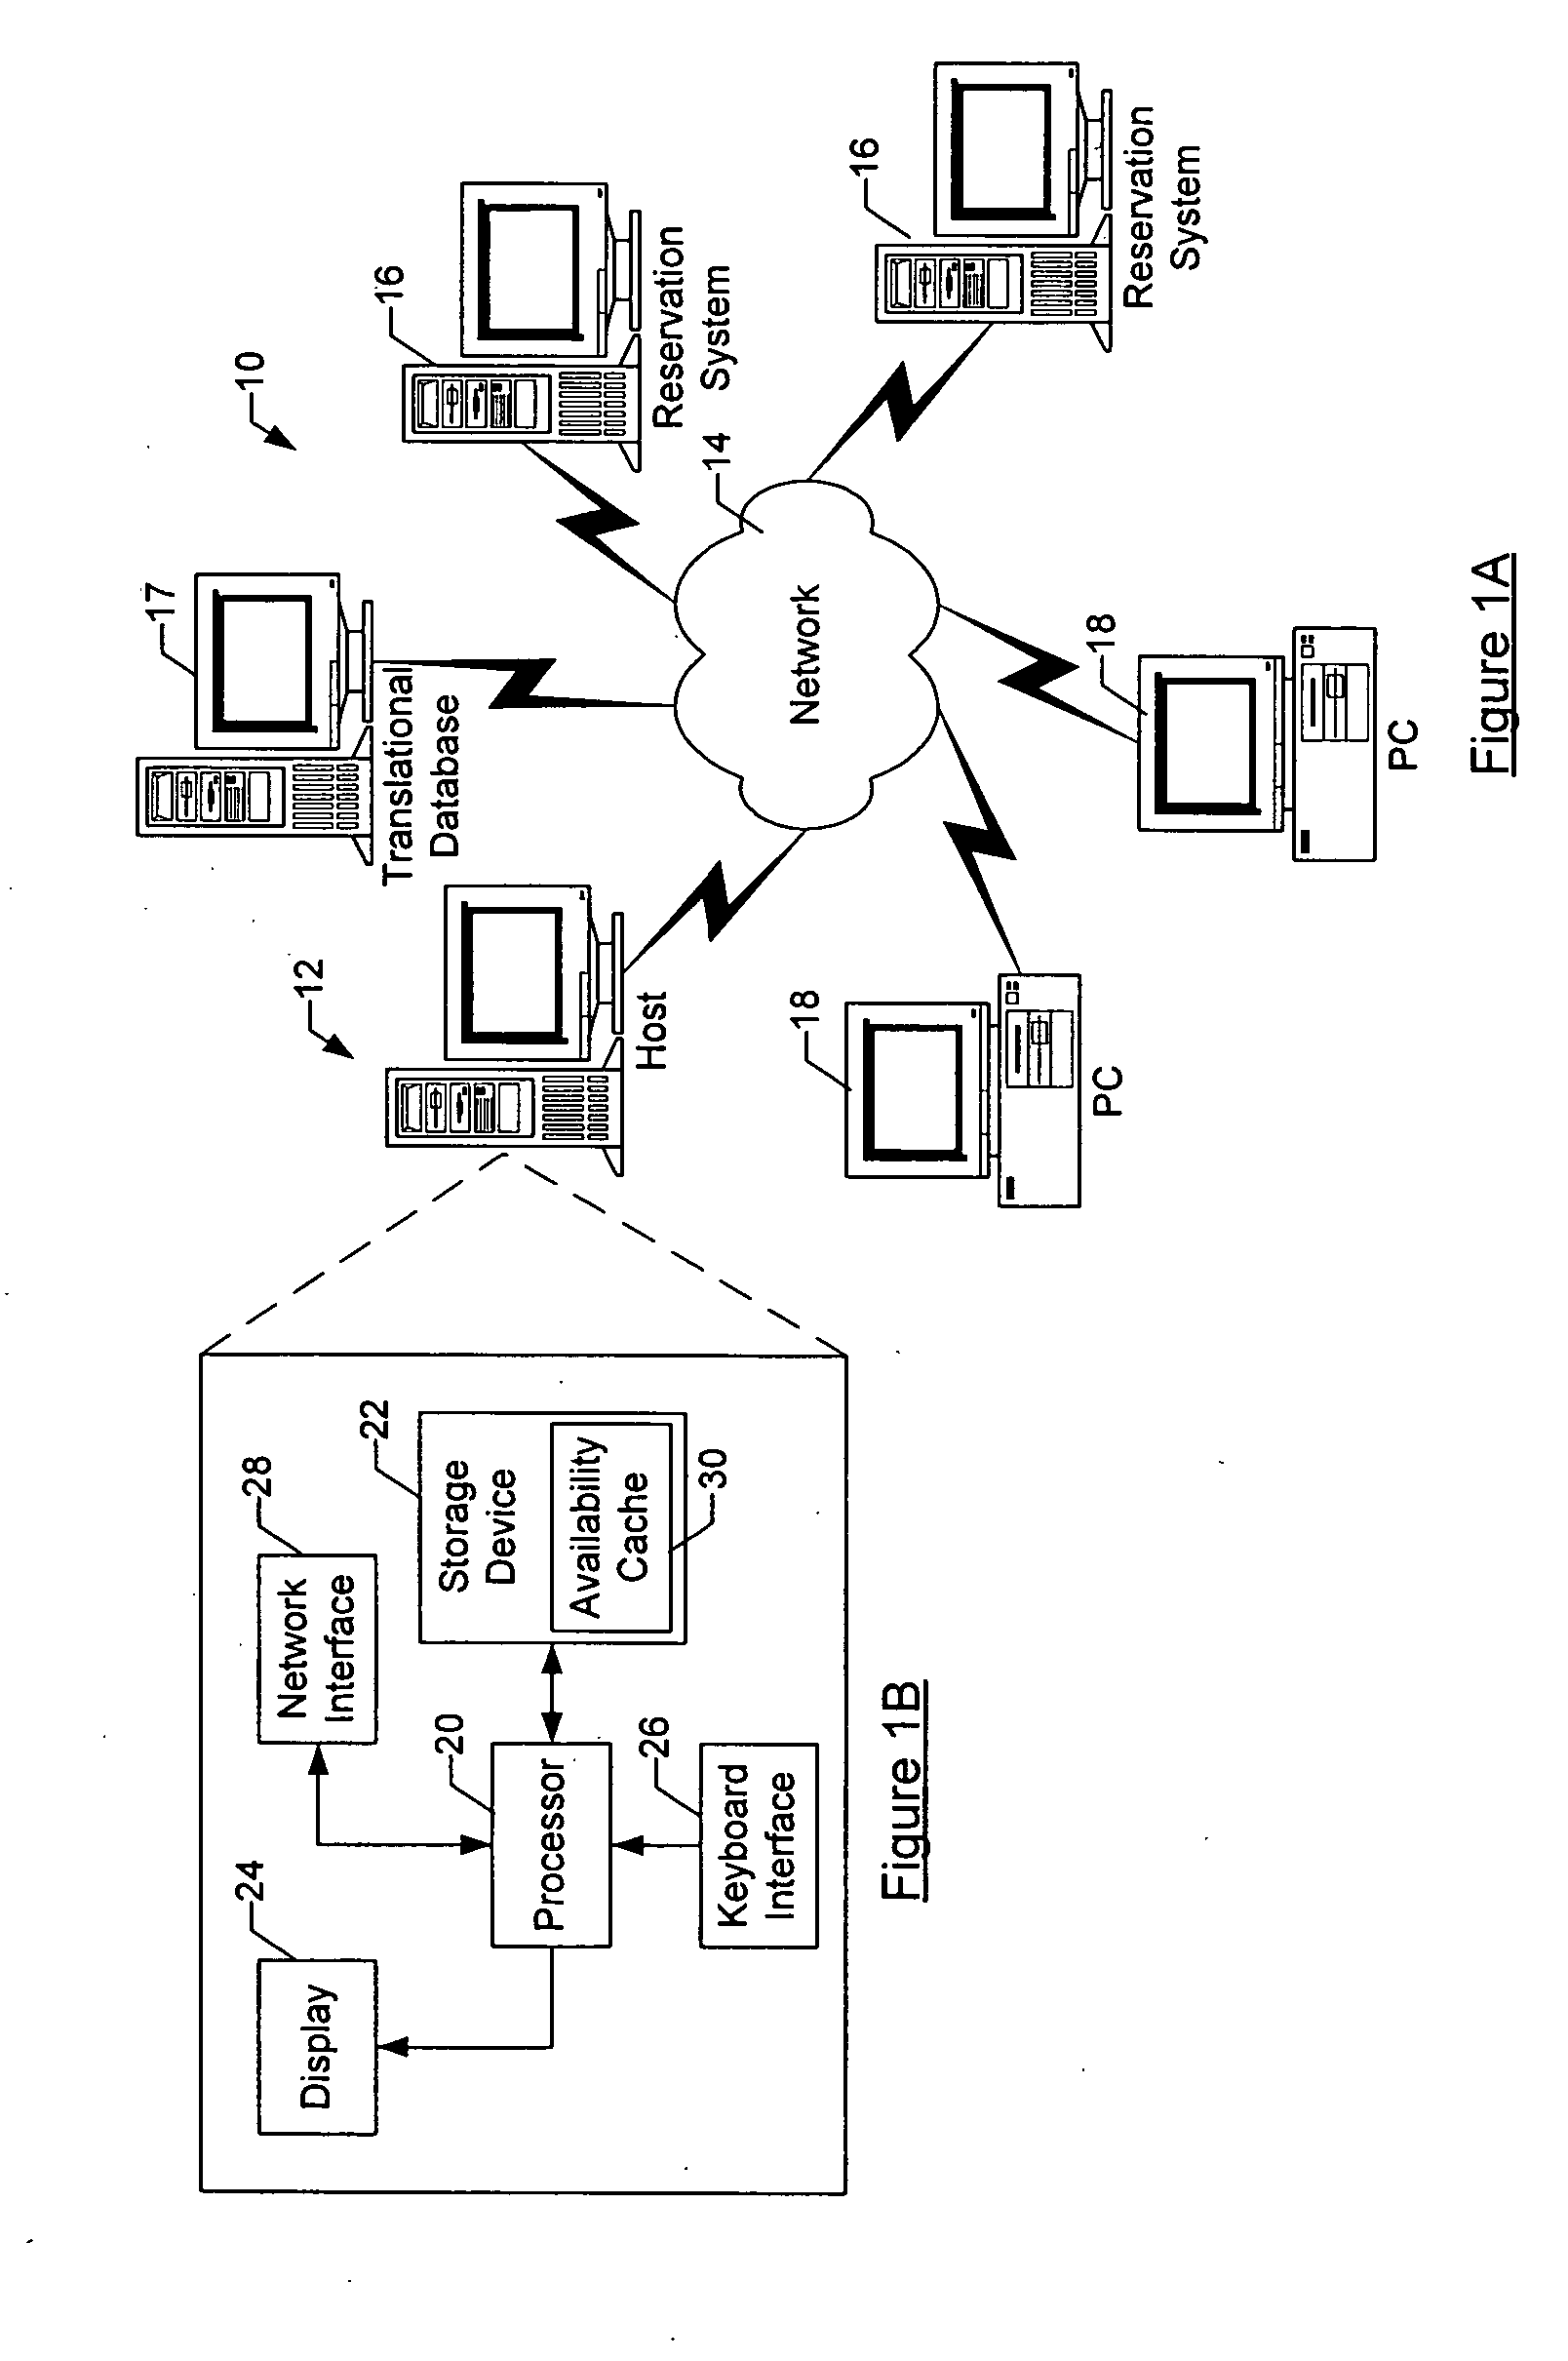 System, method, and computer program product for reducing the burden on an inventory system by retrieving, translating, and displaying attributes information corresponding to travel itineraries listed in the inventory system